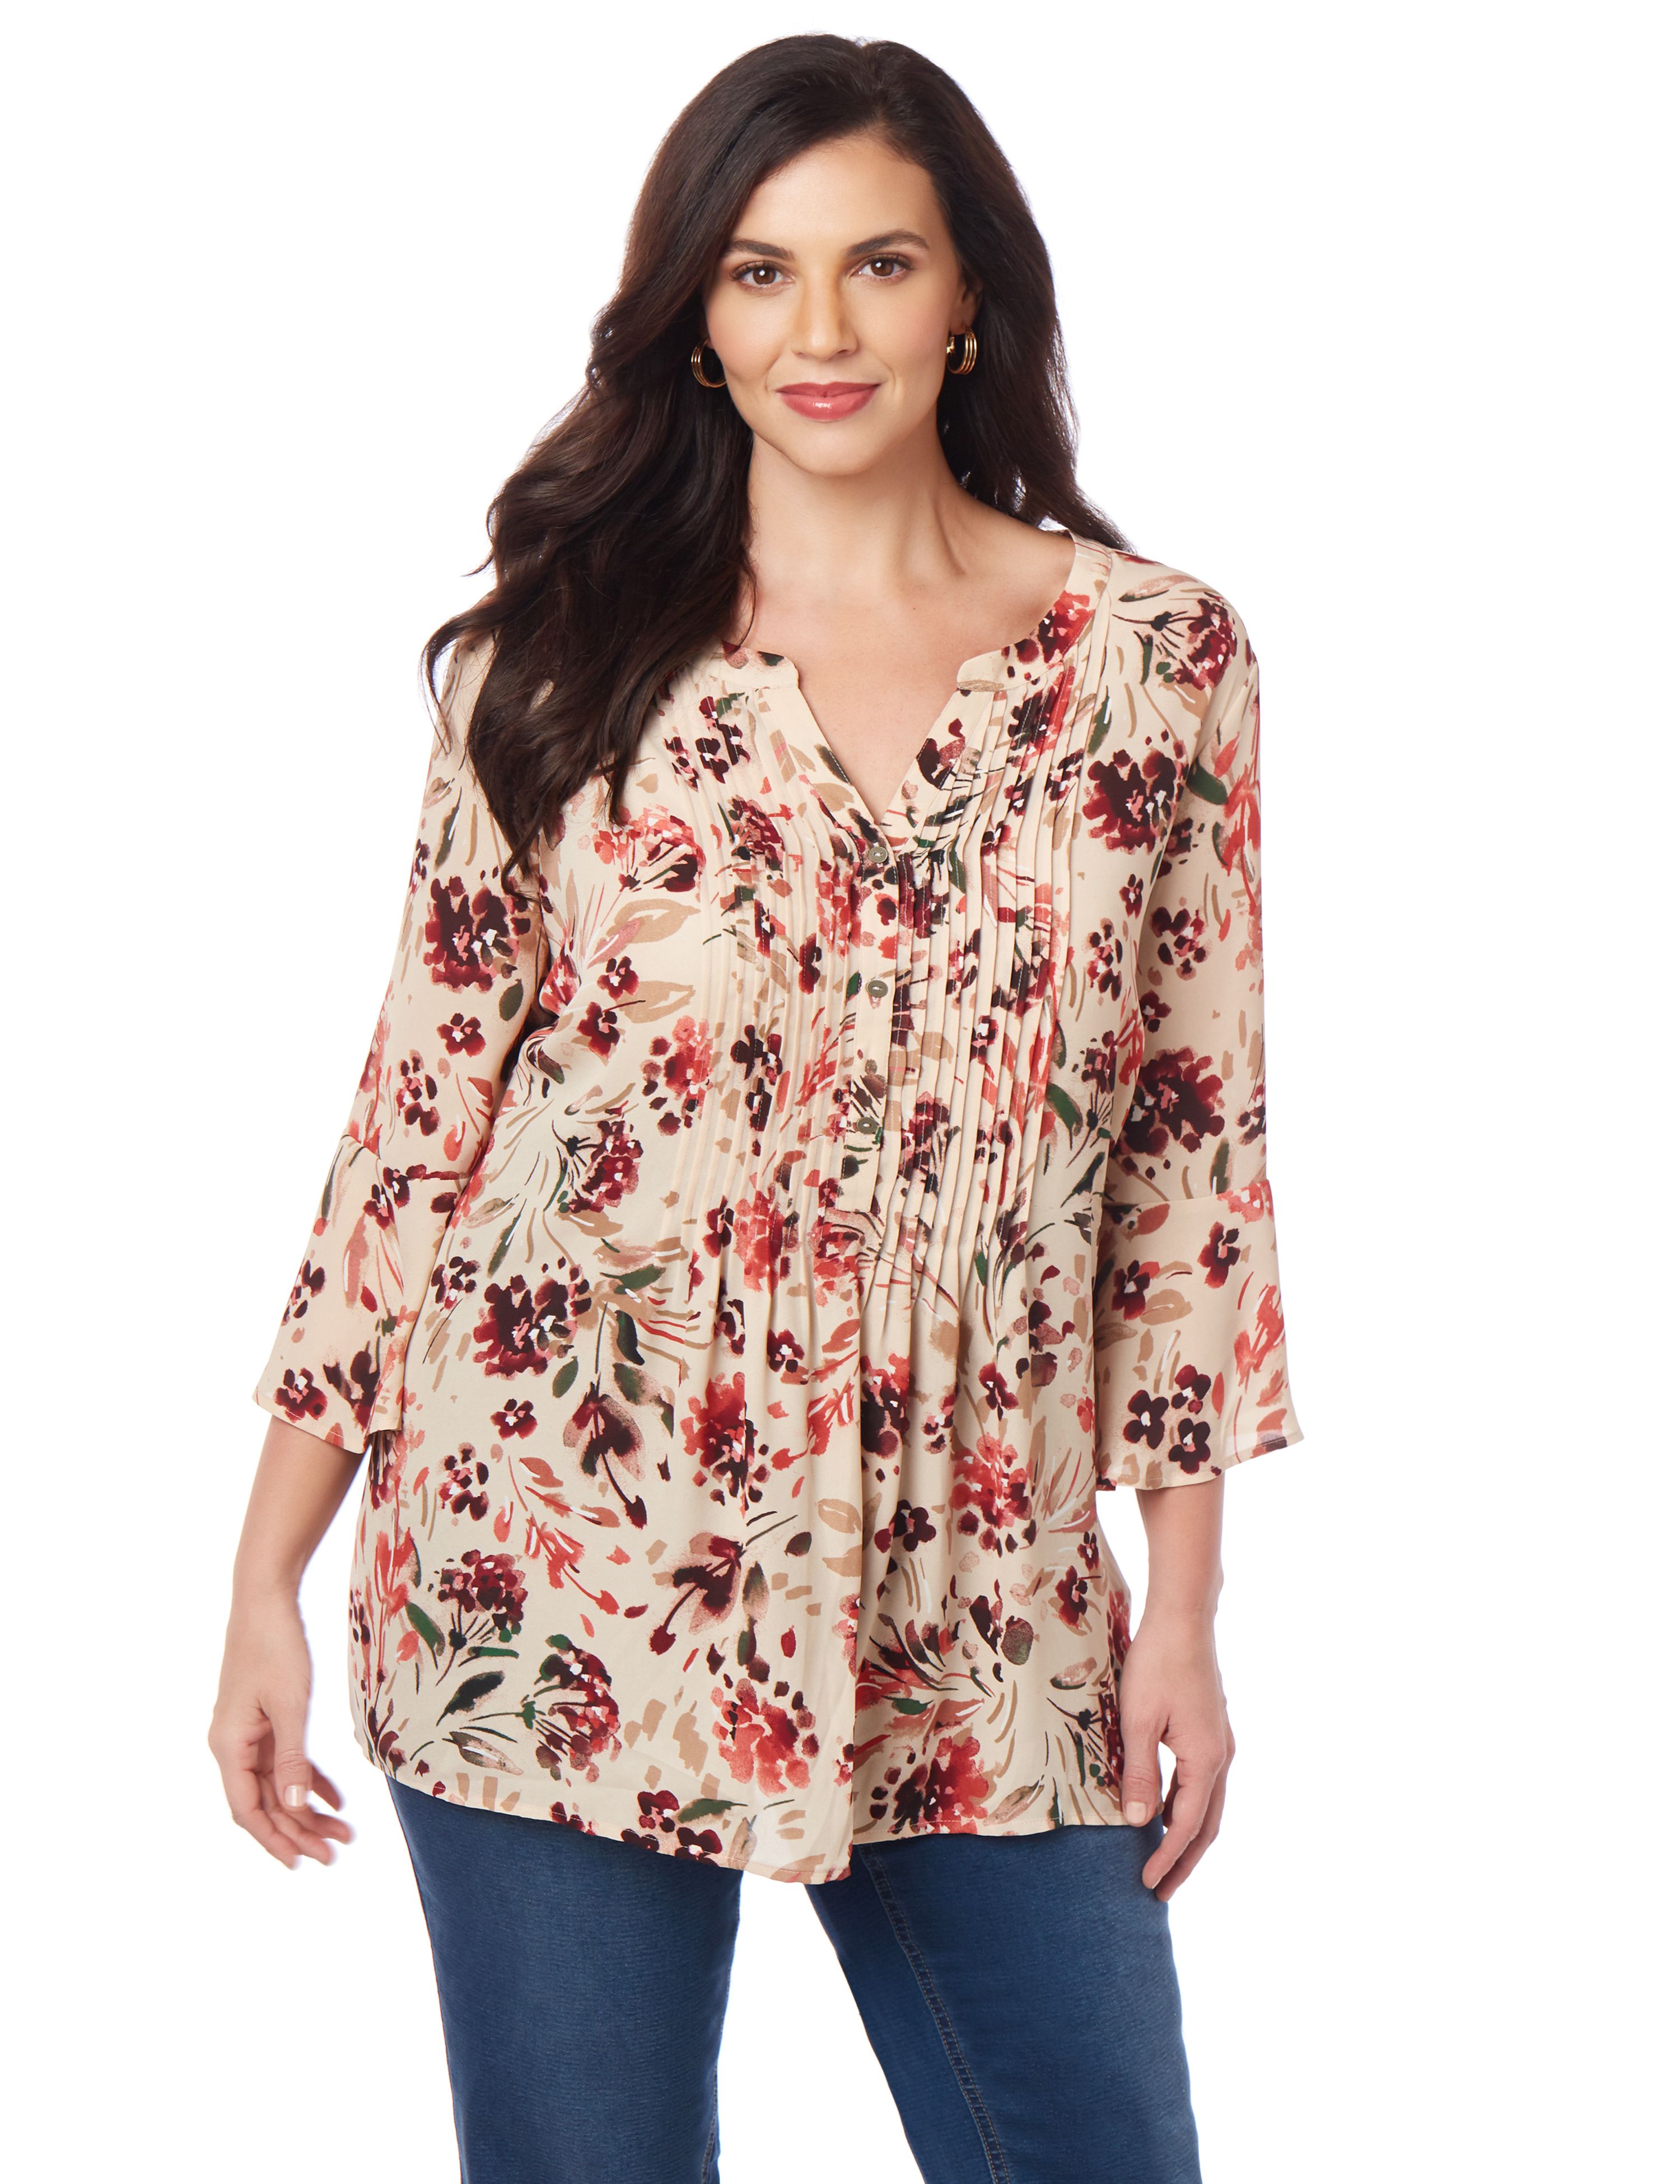 Plus Size Clearance Assortment | Catherines